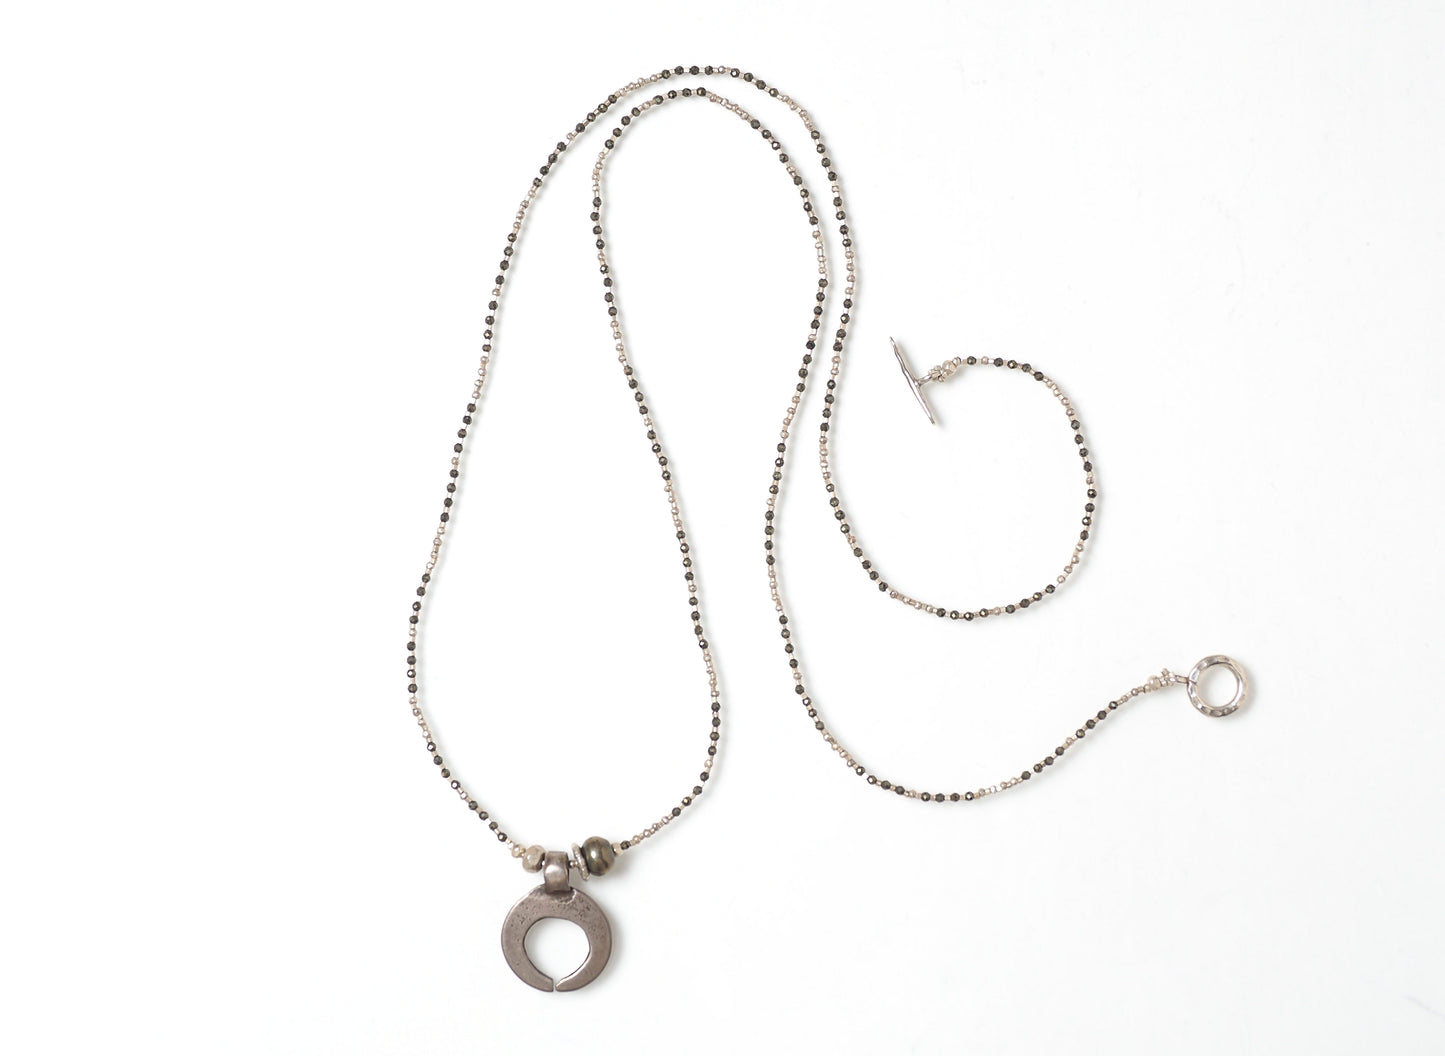 Old silver charm 'silver・pyrite' long necklace